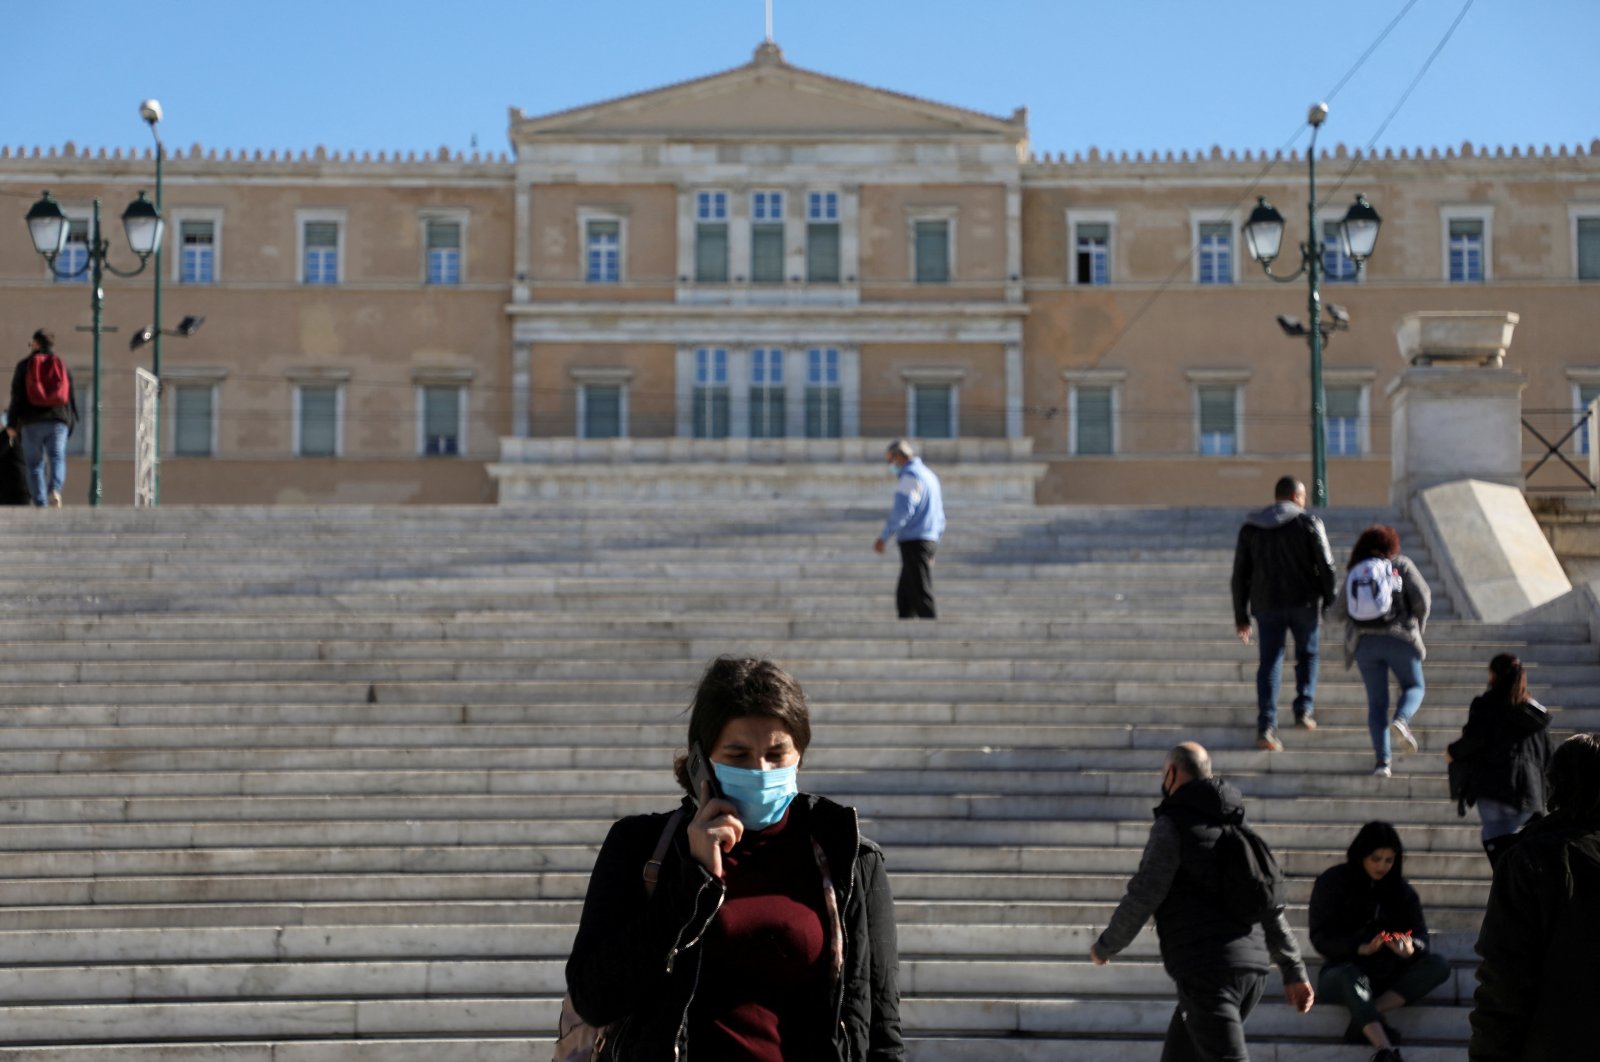 The Greek Parliament is seen in Athens, Greece, Dec. 1, 2021. (REUTERS Photo)